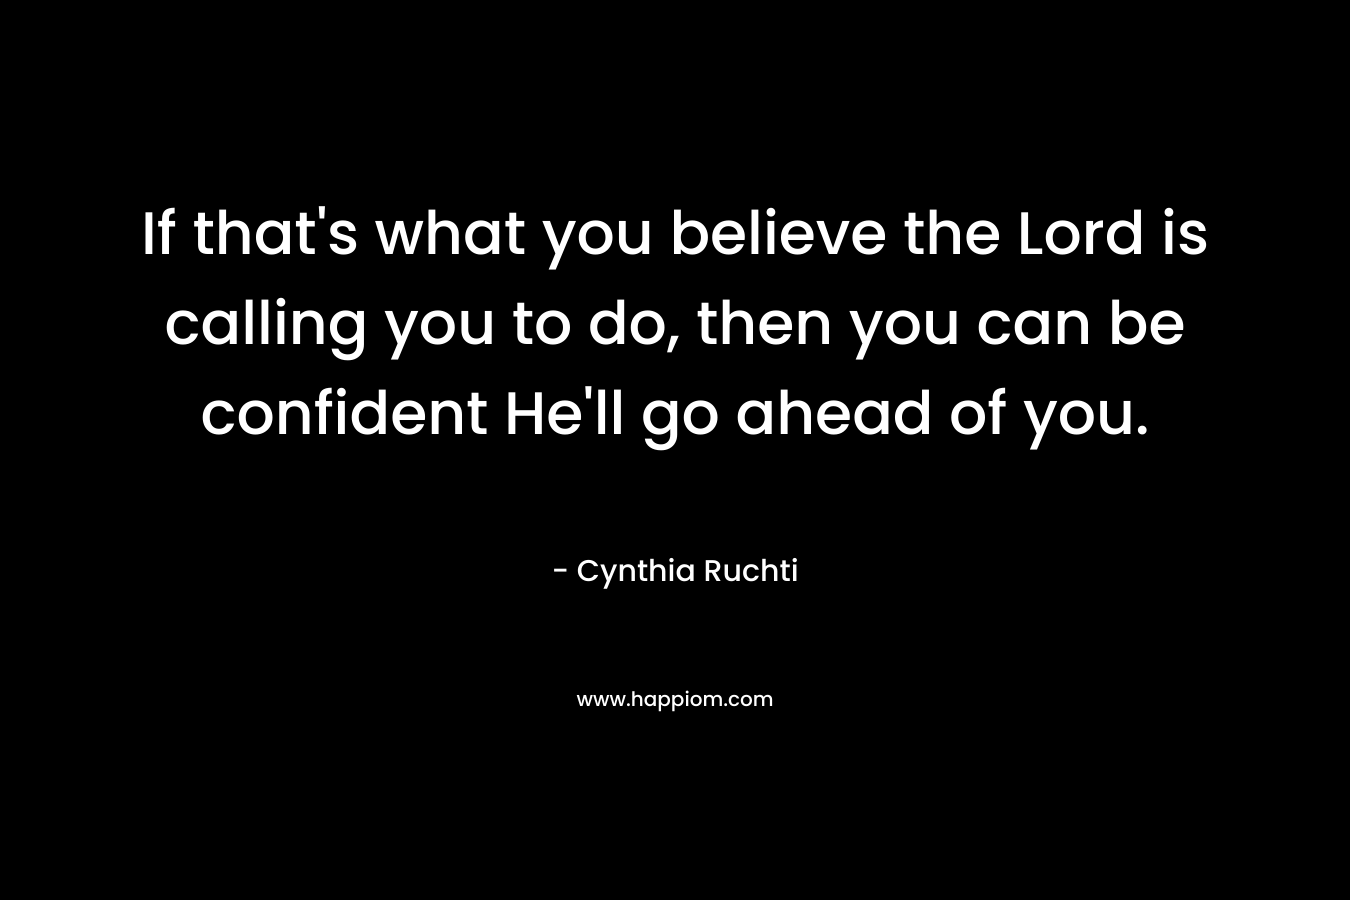 If that’s what you believe the Lord is calling you to do, then you can be confident He’ll go ahead of you. – Cynthia Ruchti